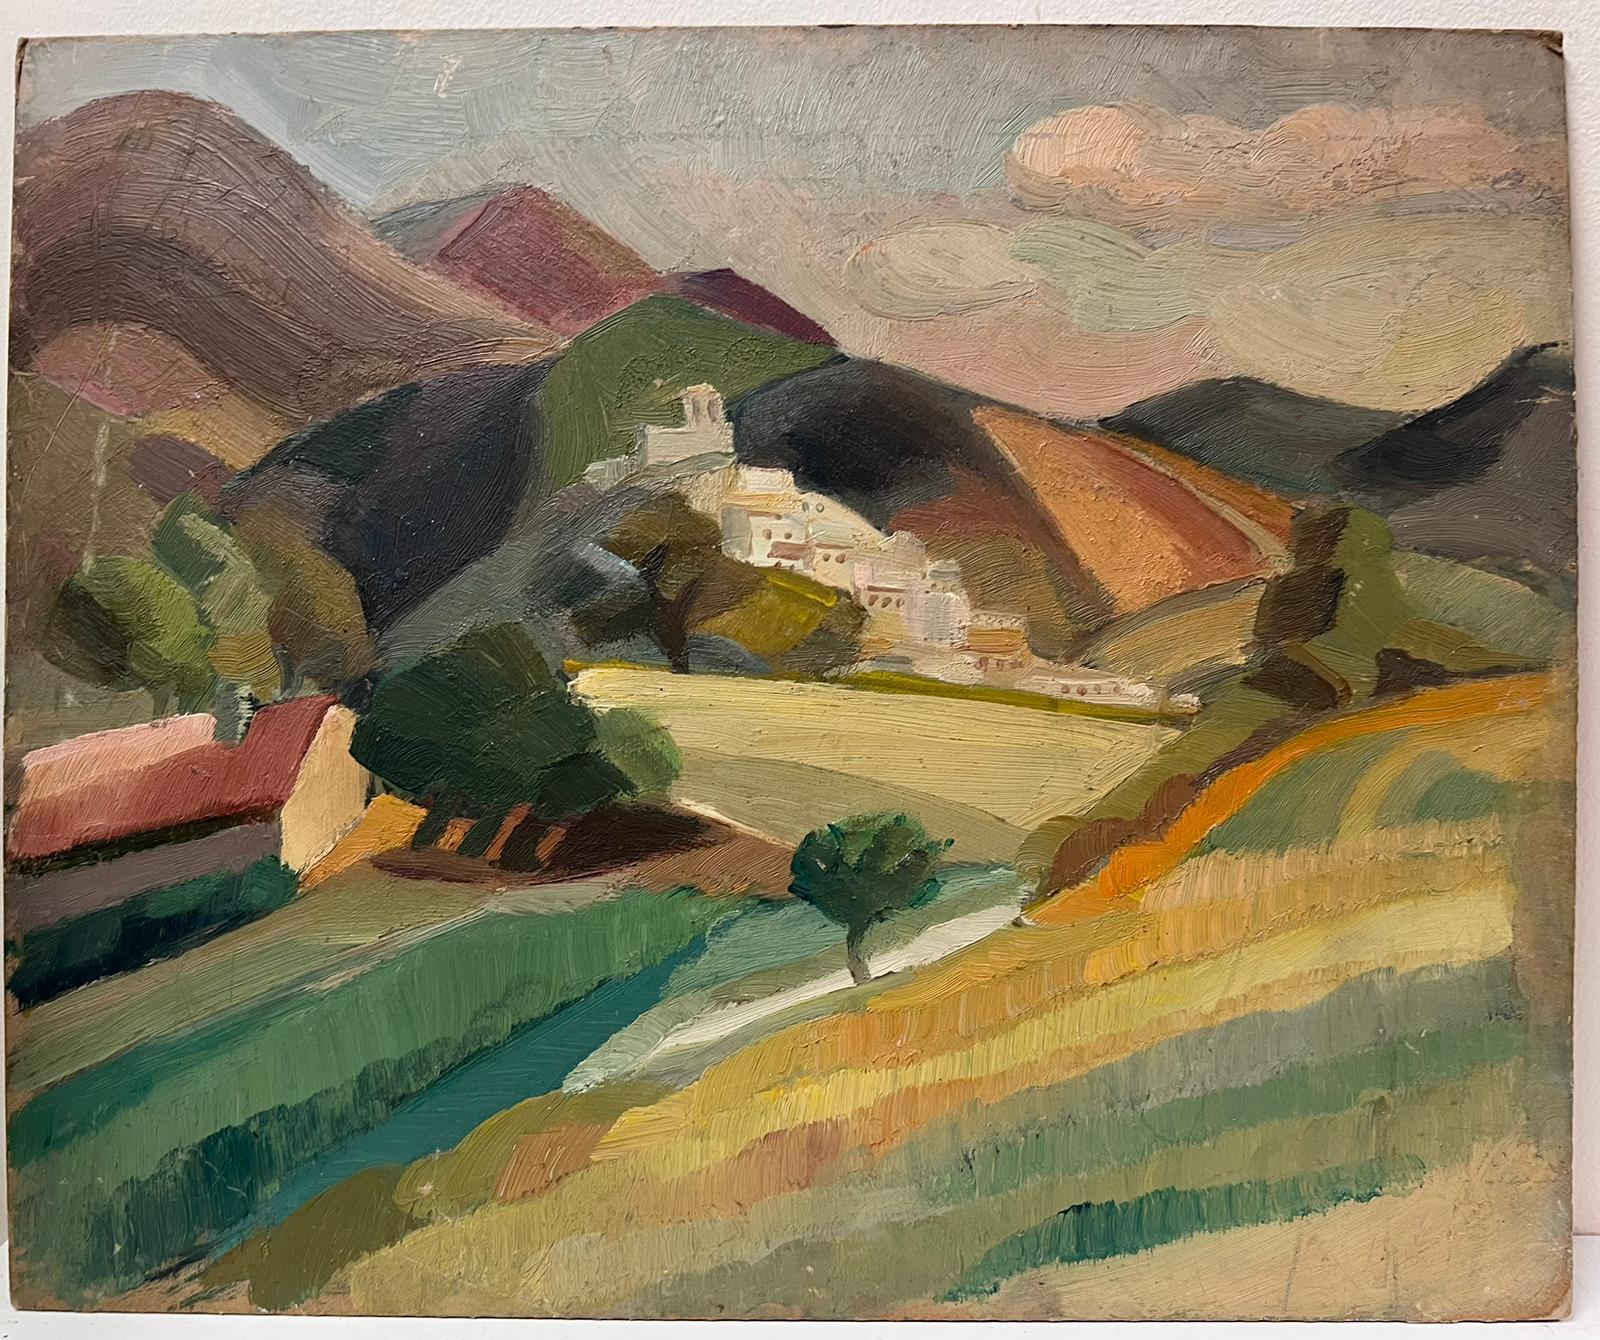 The Hill Perched Village
French School, mid 20th century
oil on board, unframed
board: 15 x 18 inches
provenance: private collection
condition: minor surface scuffs but overall good and sound condition